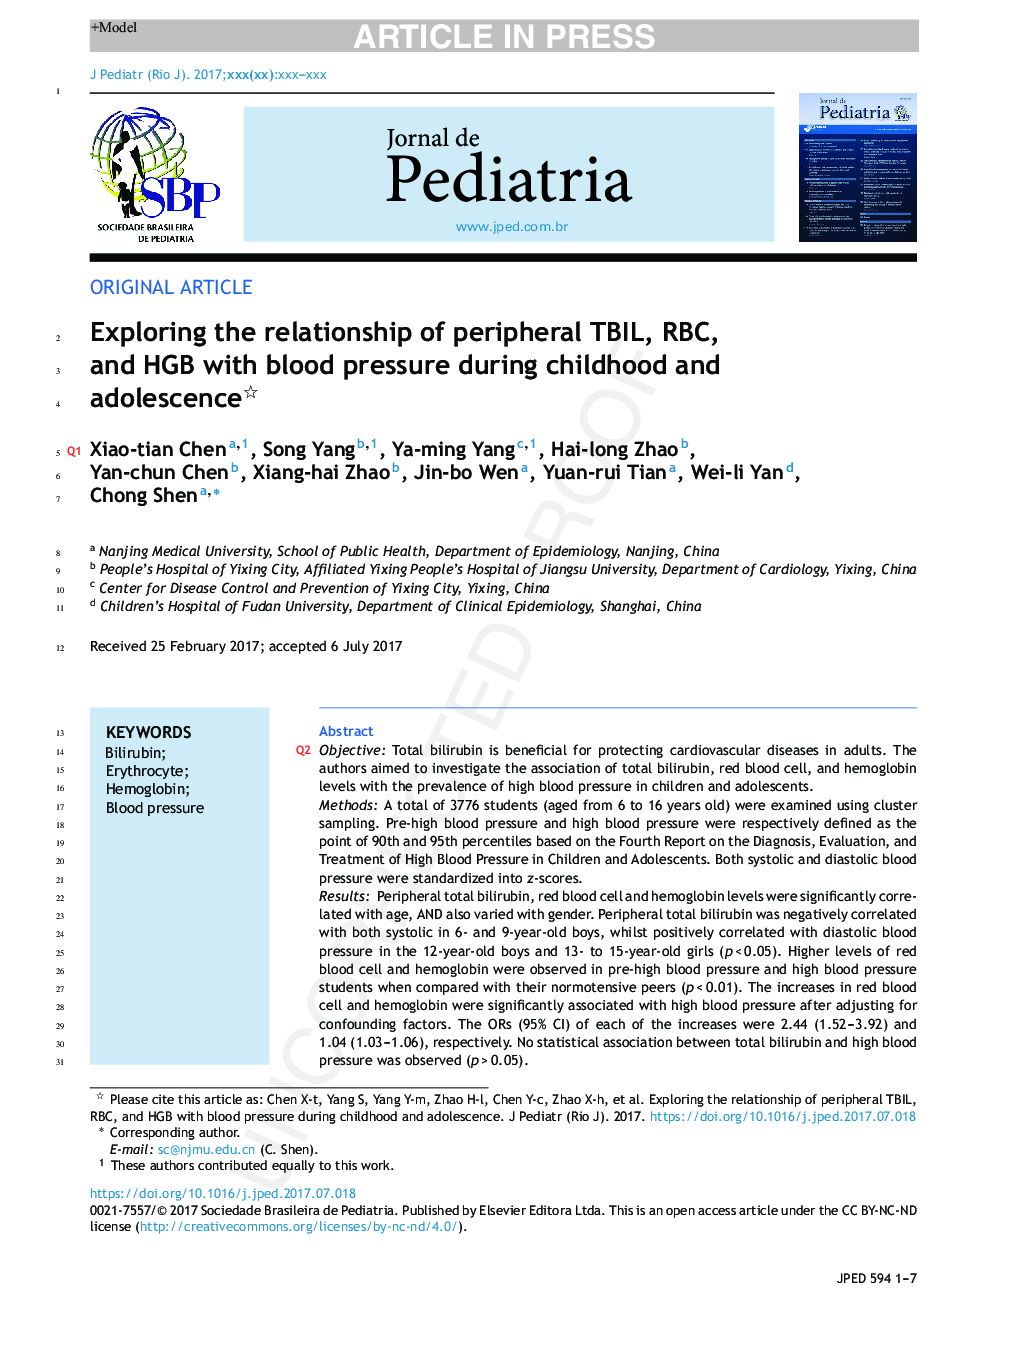 Exploring the relationship of peripheral total bilirubin, red blood cell, and hemoglobin with blood pressure during childhood and adolescence